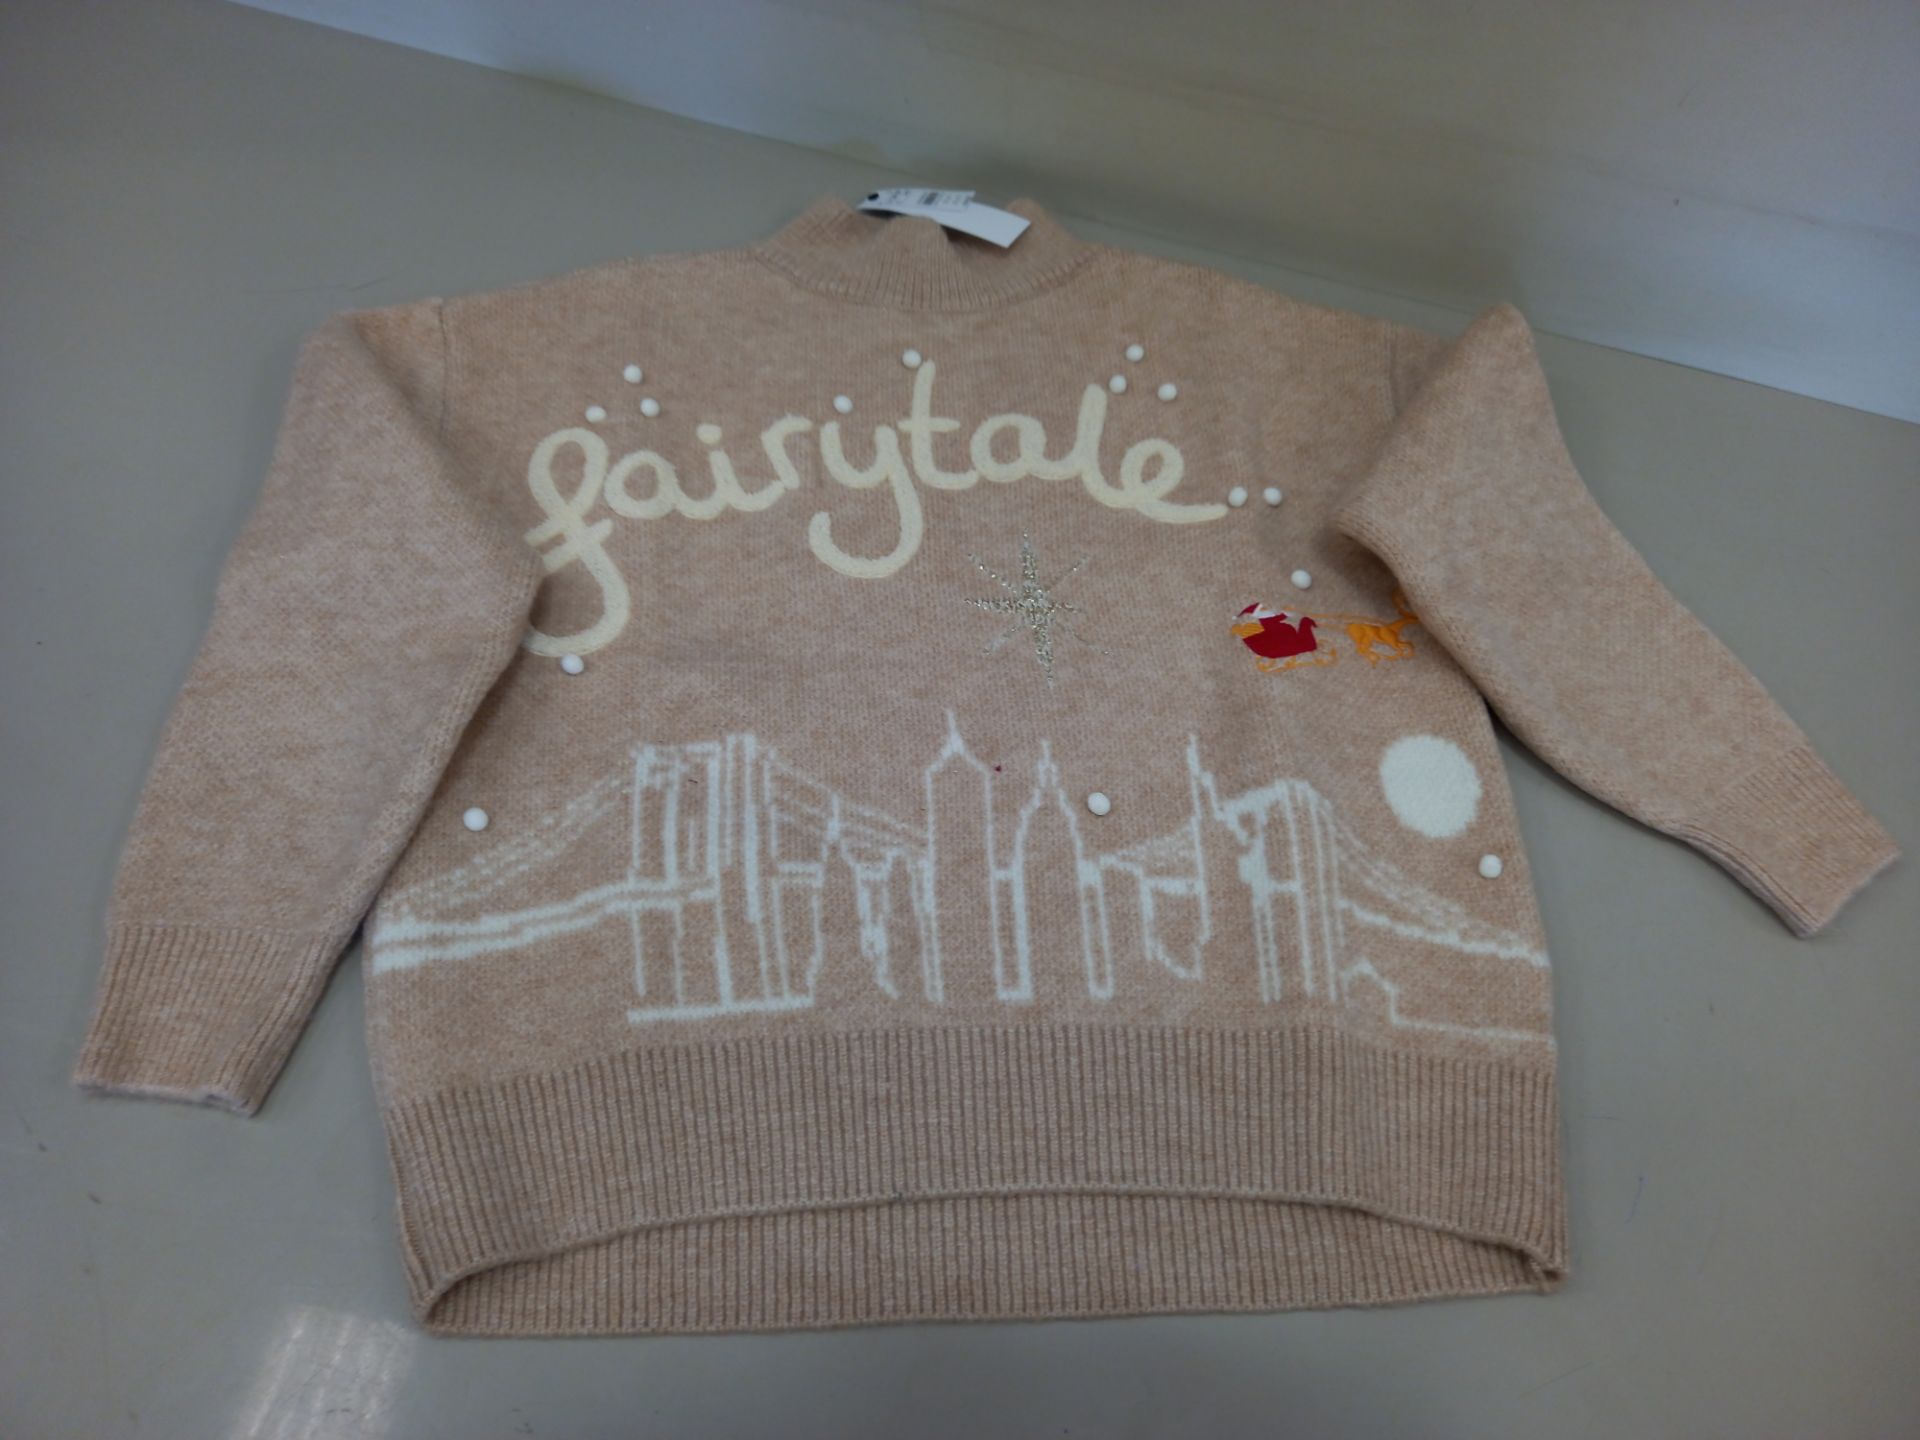 10 X BRAND NEW TOPSHOP FAIRYTALE JUMPER SIZE EXTRA SMALL RRP £39.00 (TOTAL RRP £390.00)